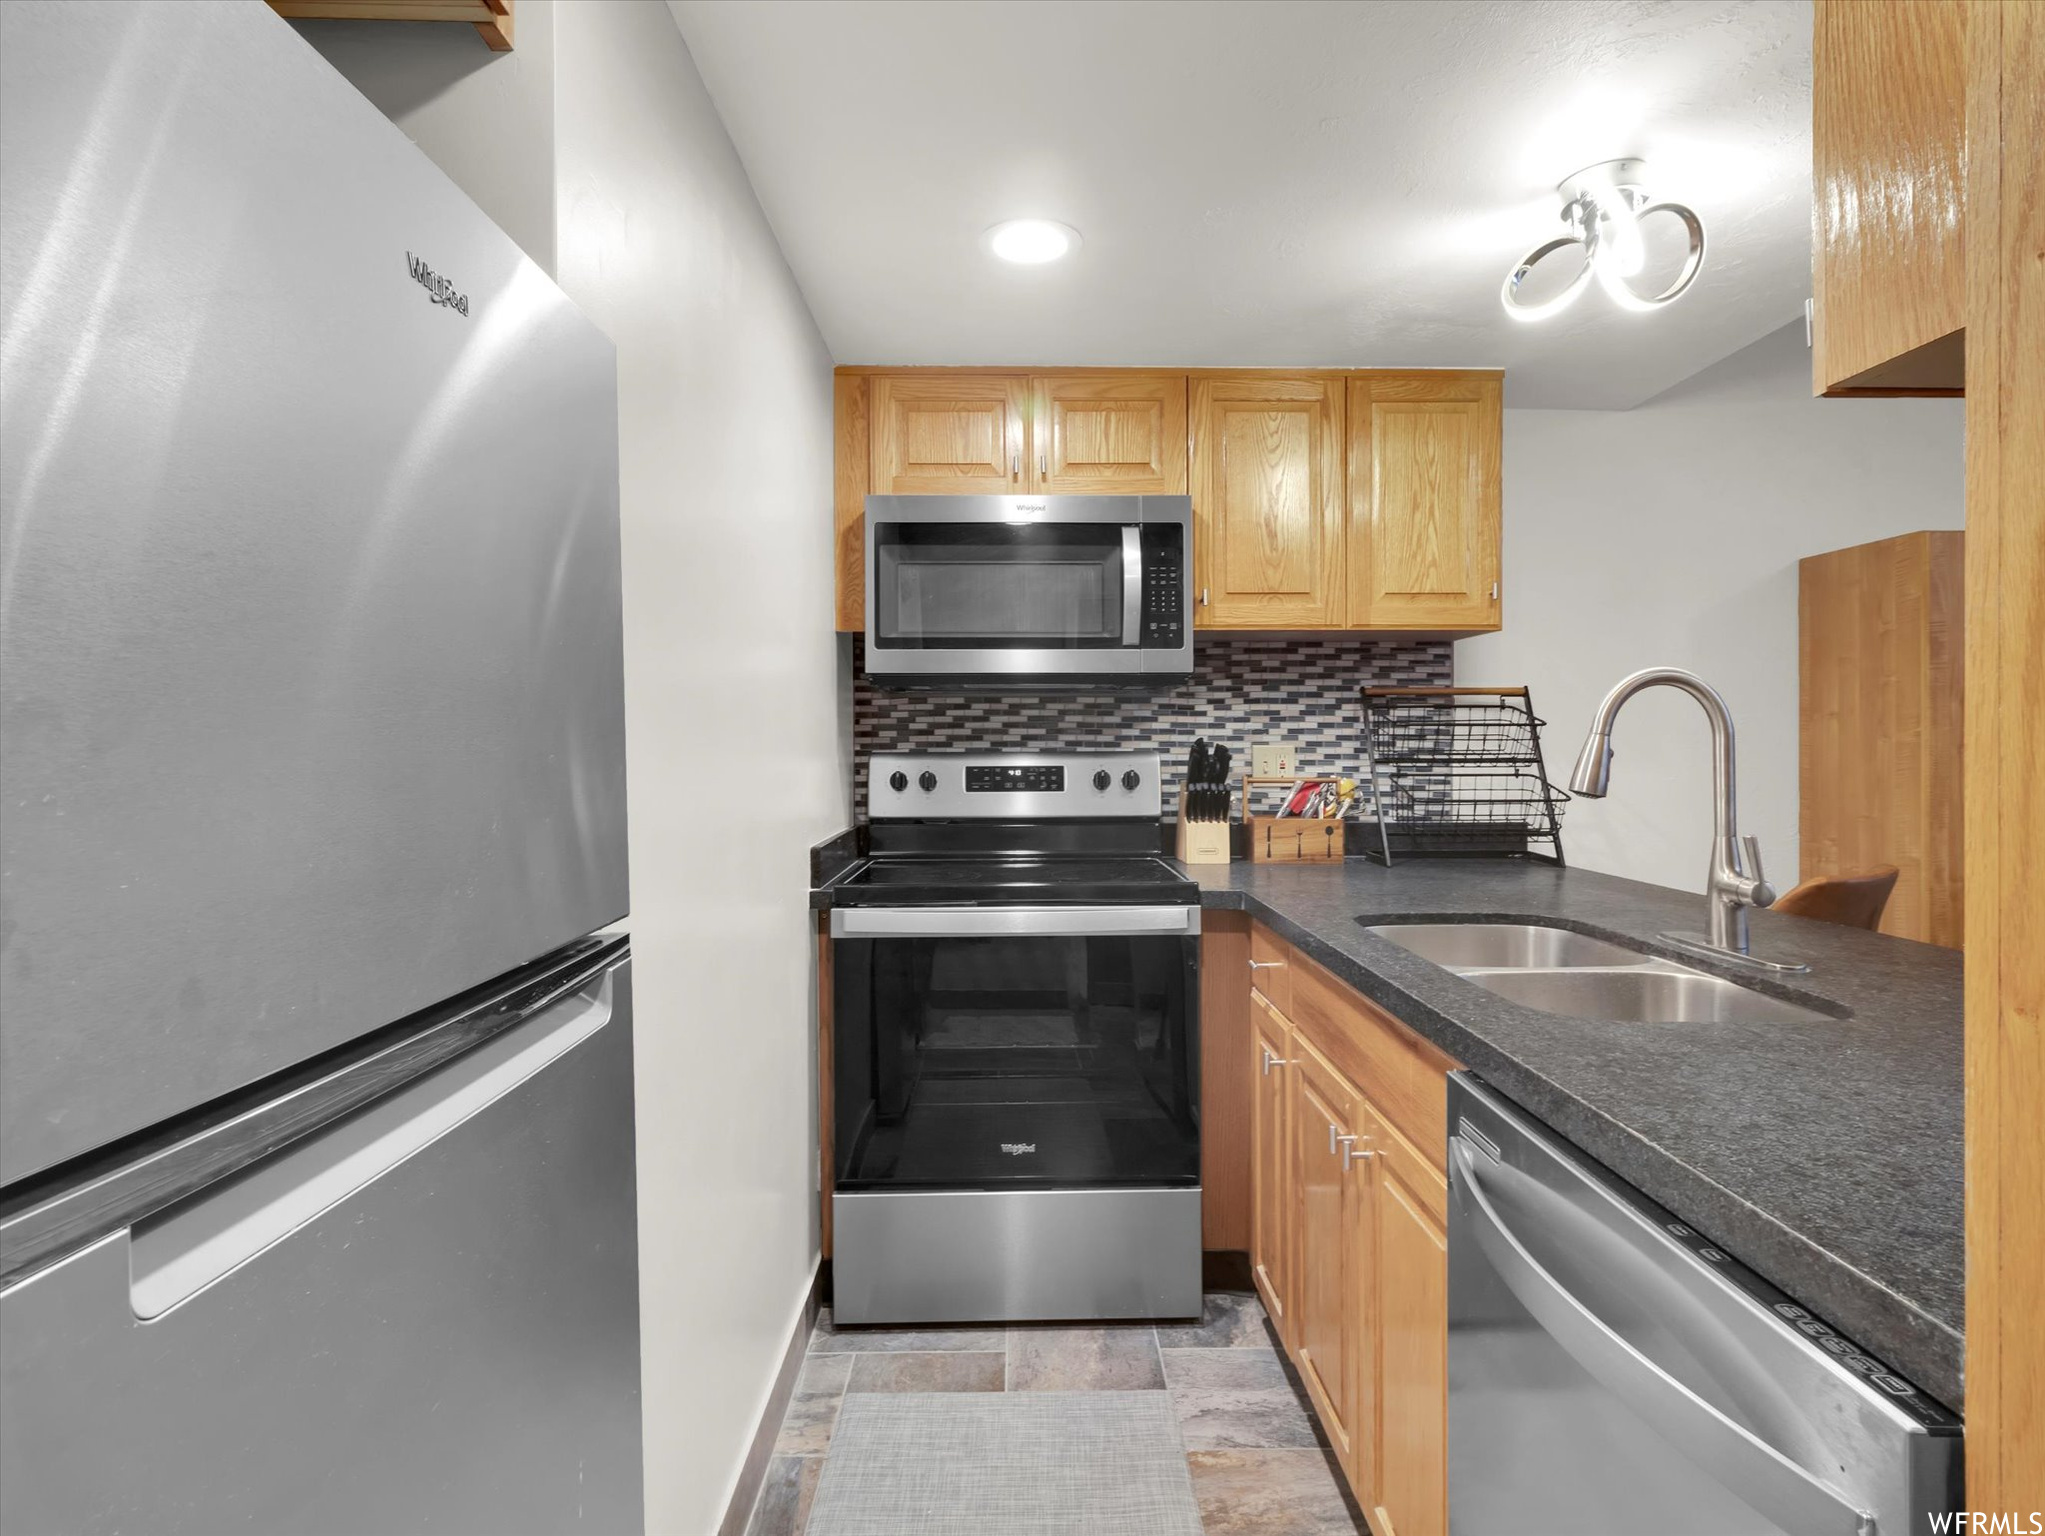 Kitchen with light tile floors, tasteful backsplash, sink, and appliances with stainless steel finishes